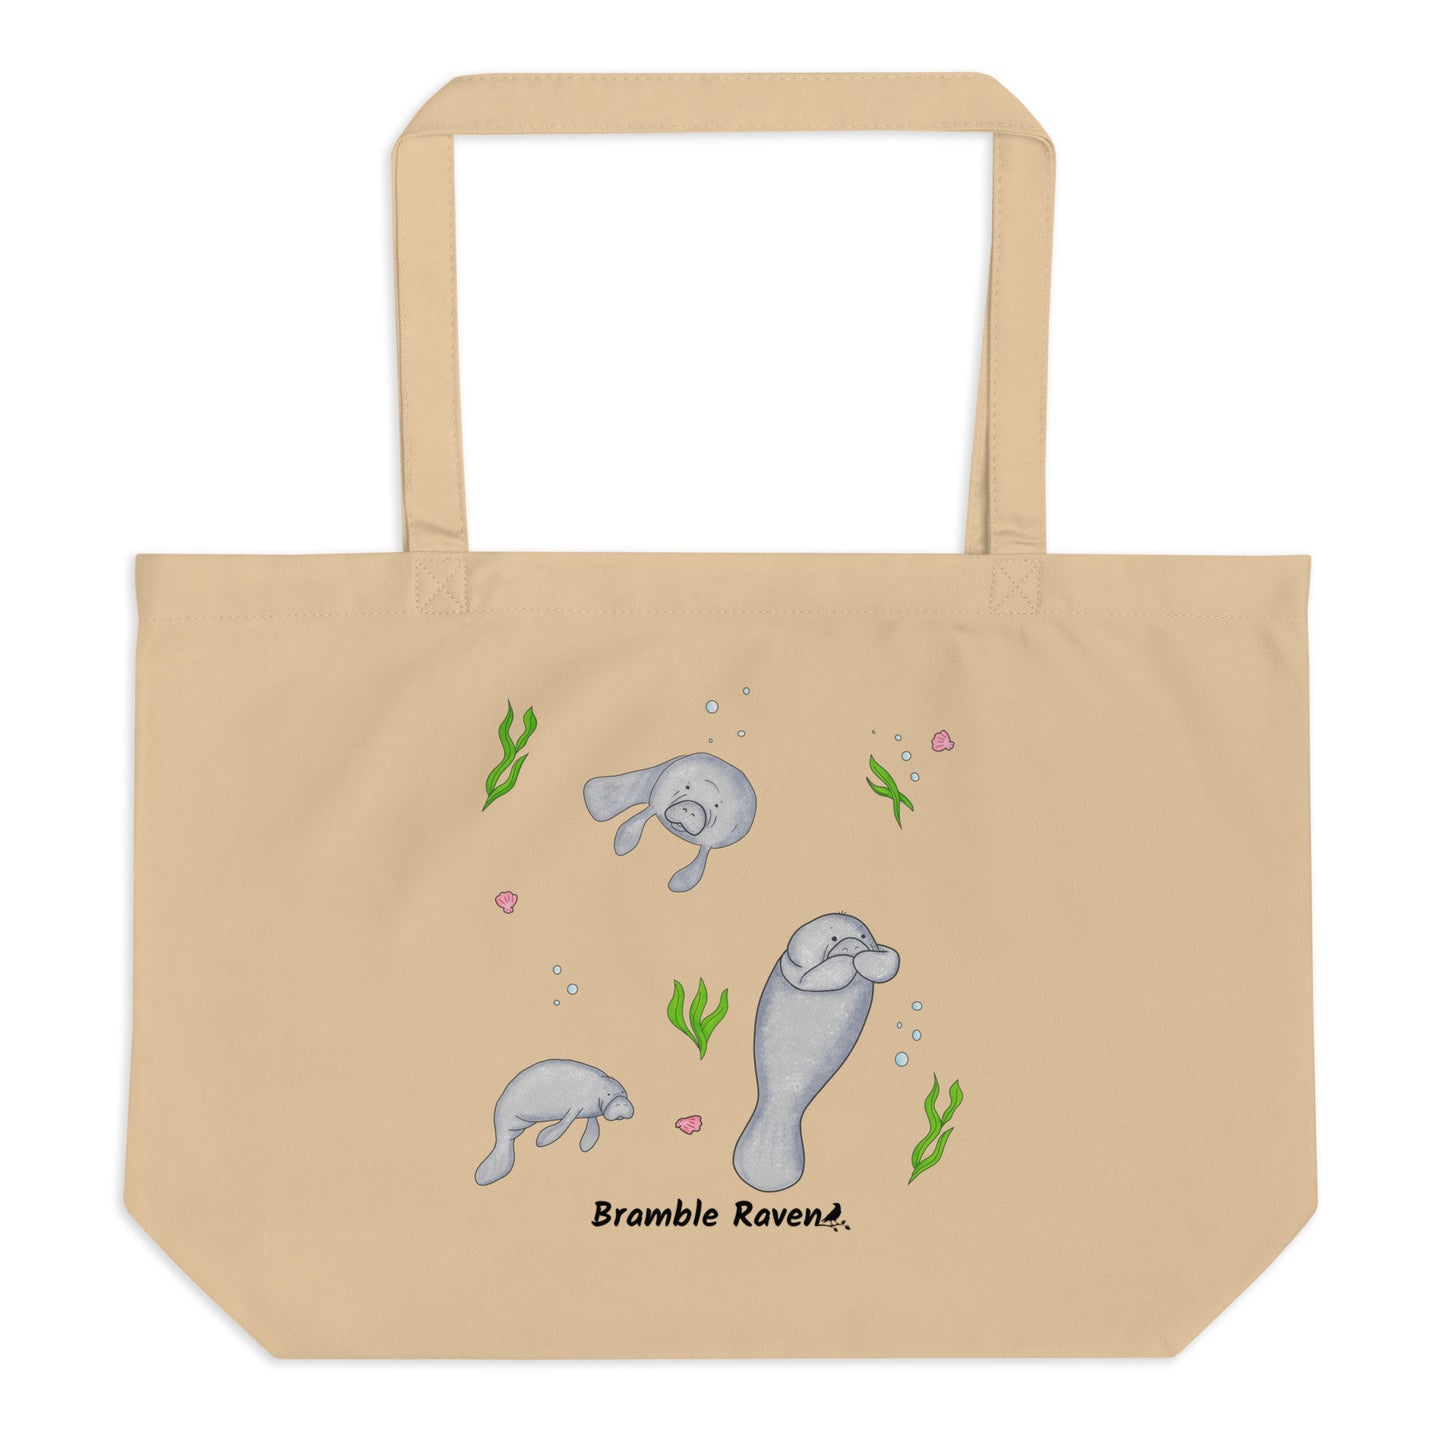 20″ × 14″ × 5″ 100% organic cotton tote bag. Features three manatees with accents of seashells, seaweed, and bubbles. Oyster colored fabric with dual handles. 